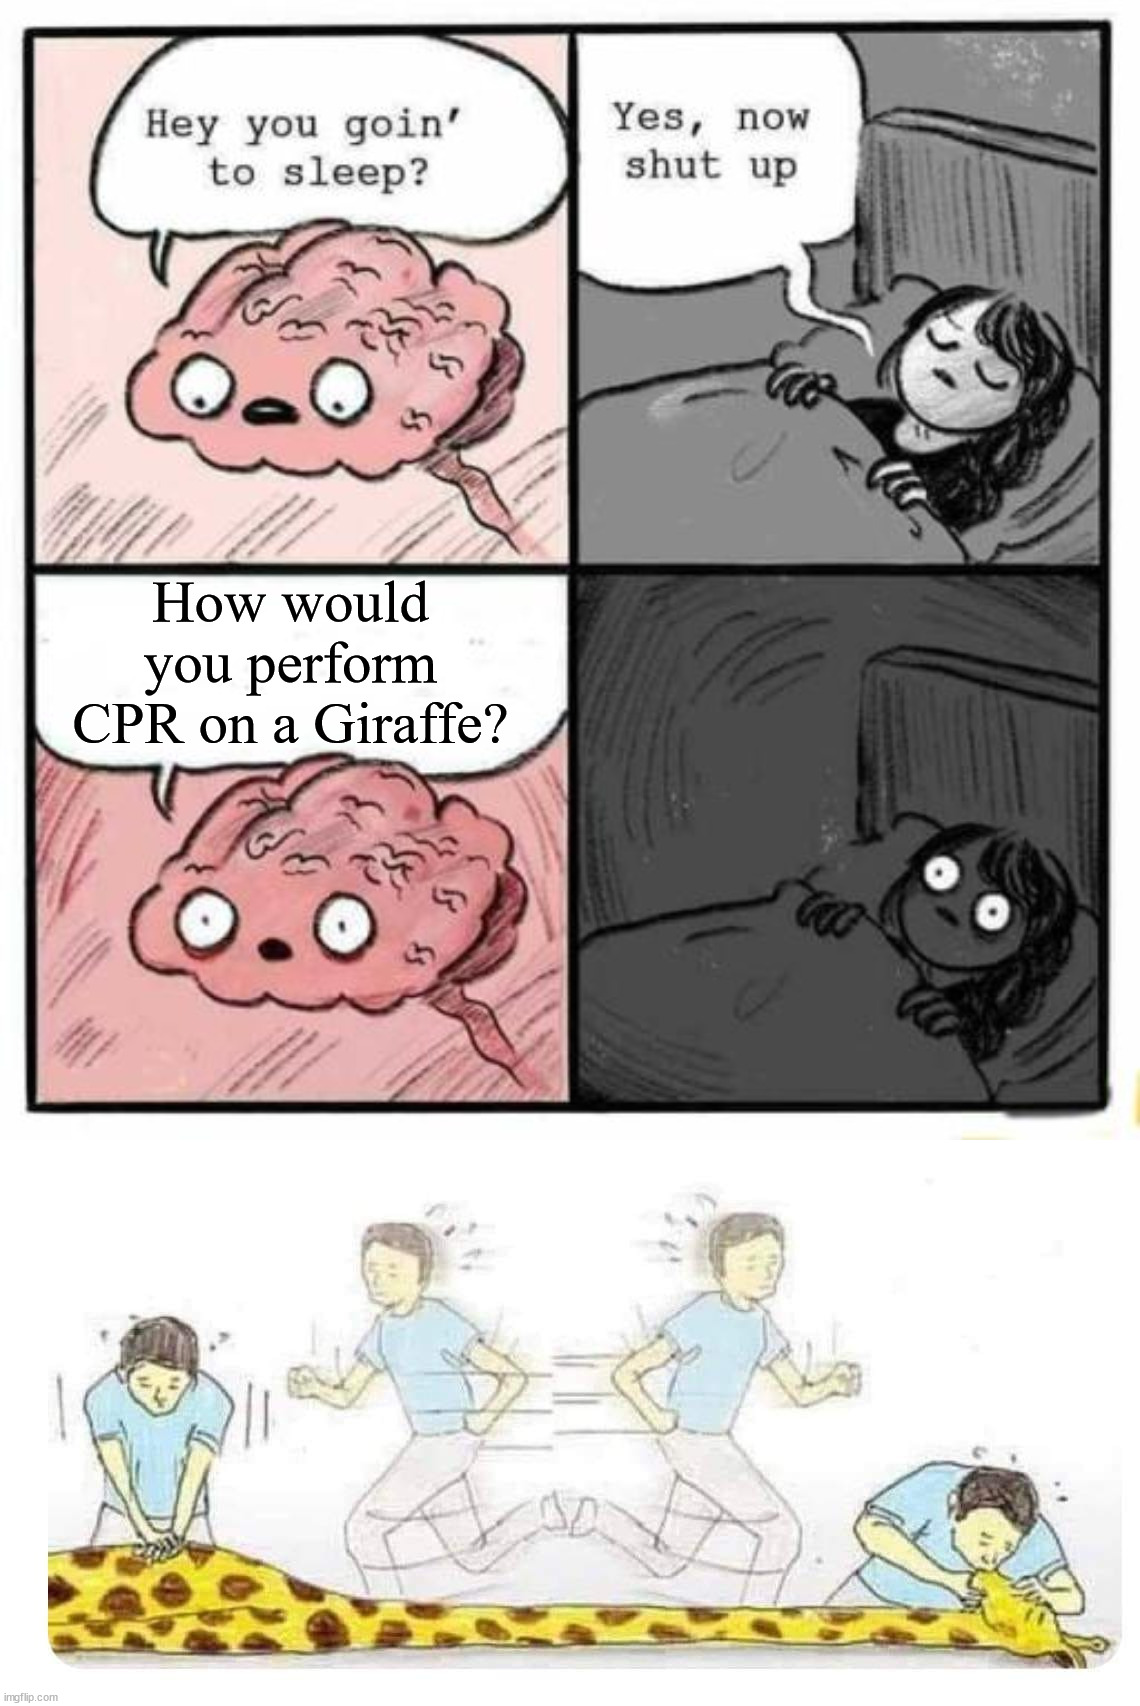 This keeps me awake most nights. | How would you perform CPR on a Giraffe? | image tagged in hey you going to sleep,giraffe,how would,deep thoughts,nightmare | made w/ Imgflip meme maker